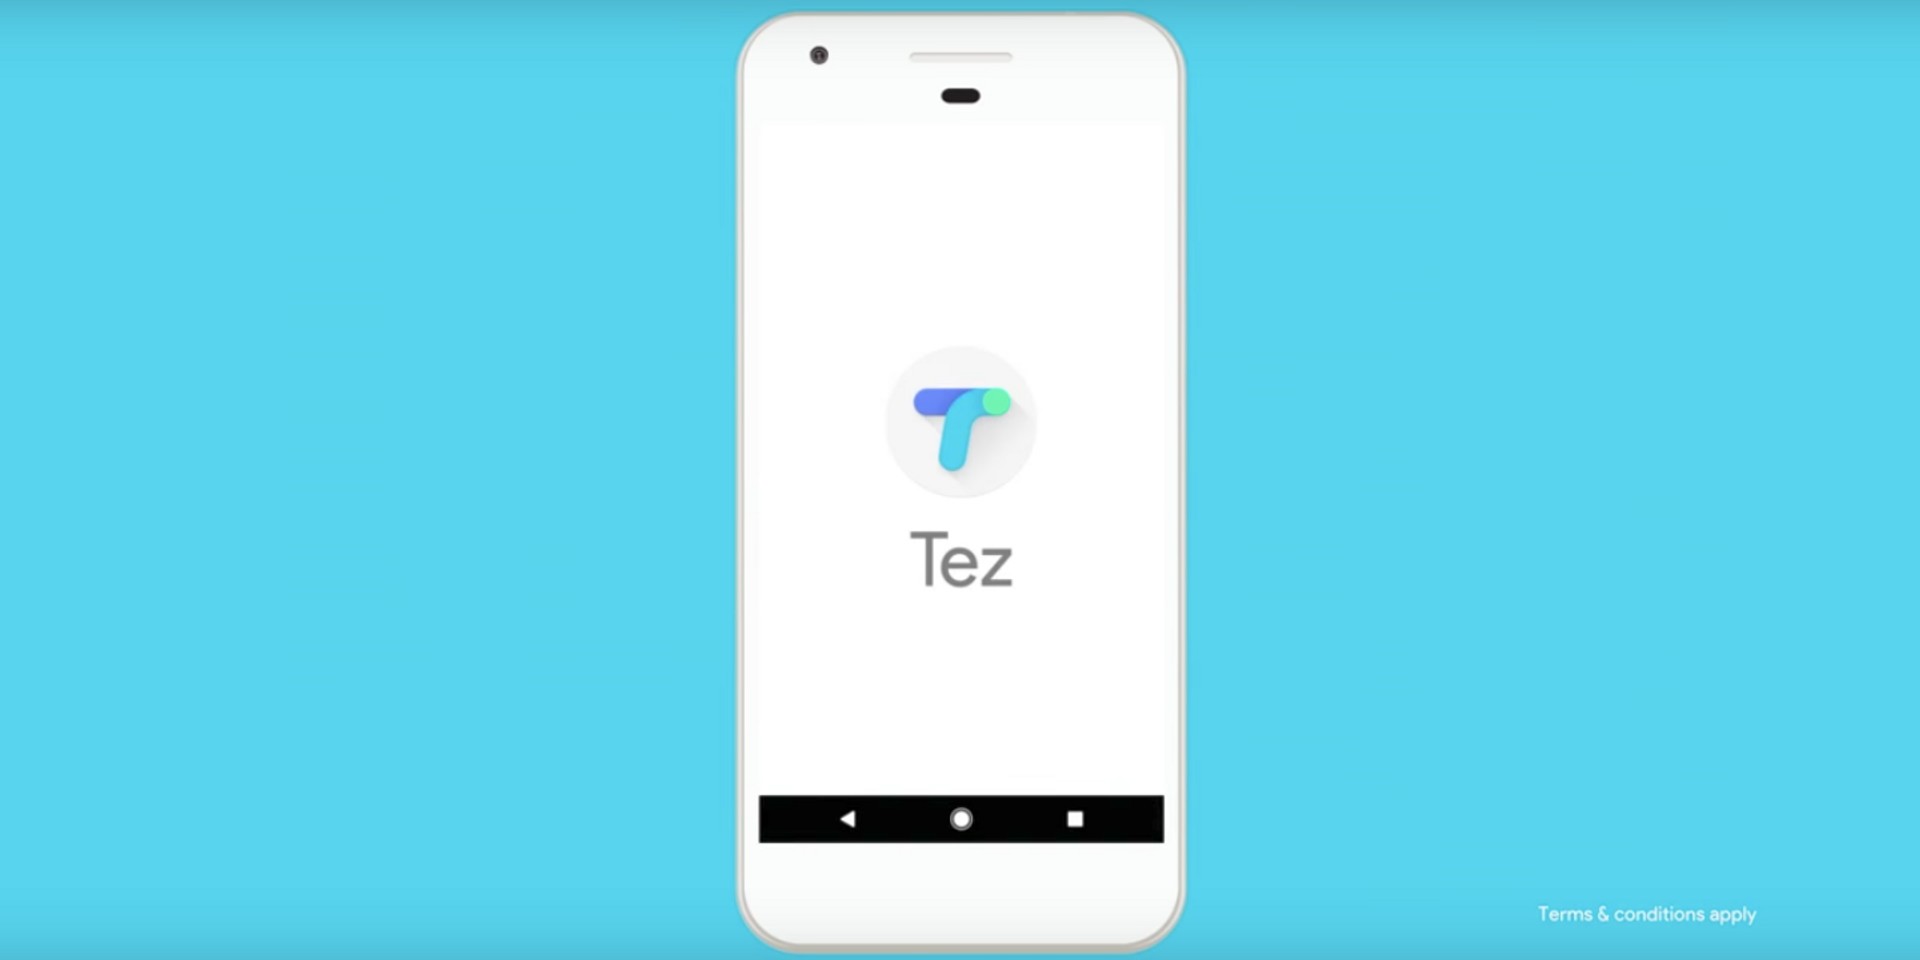 Google's latest app in India uses a new money transfer method: sound